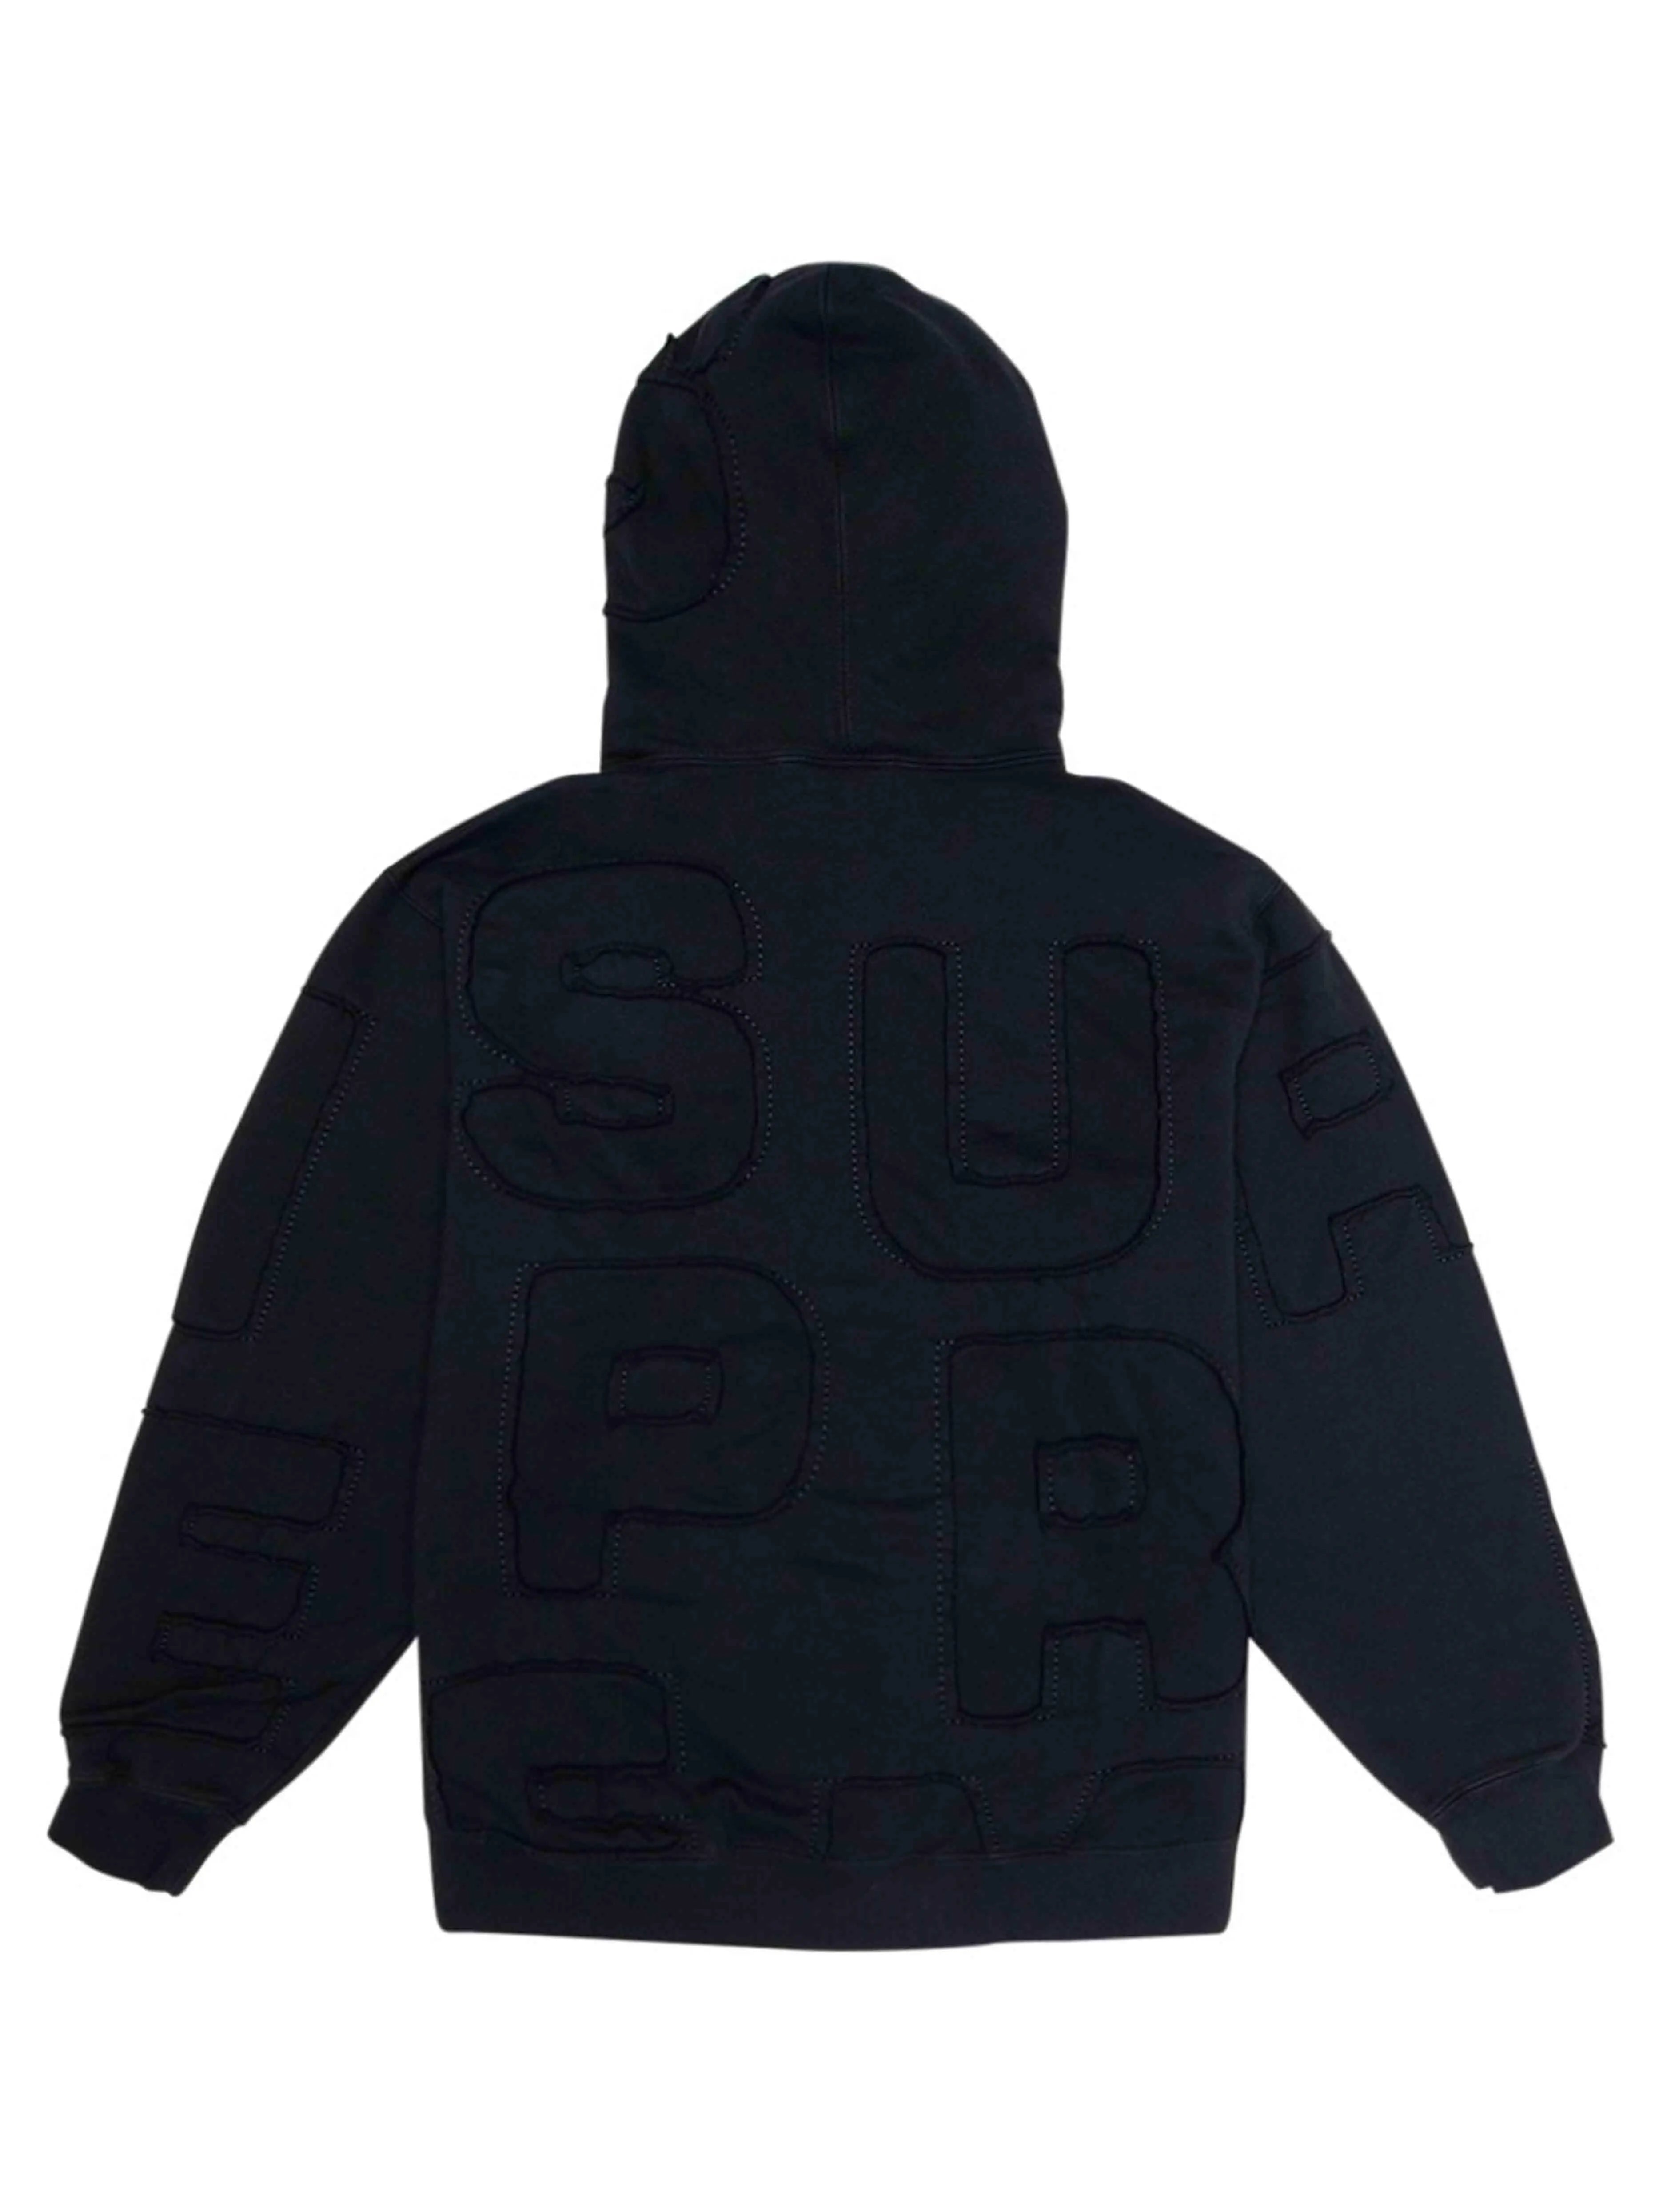 Supreme cutout letters hooded BLACK M